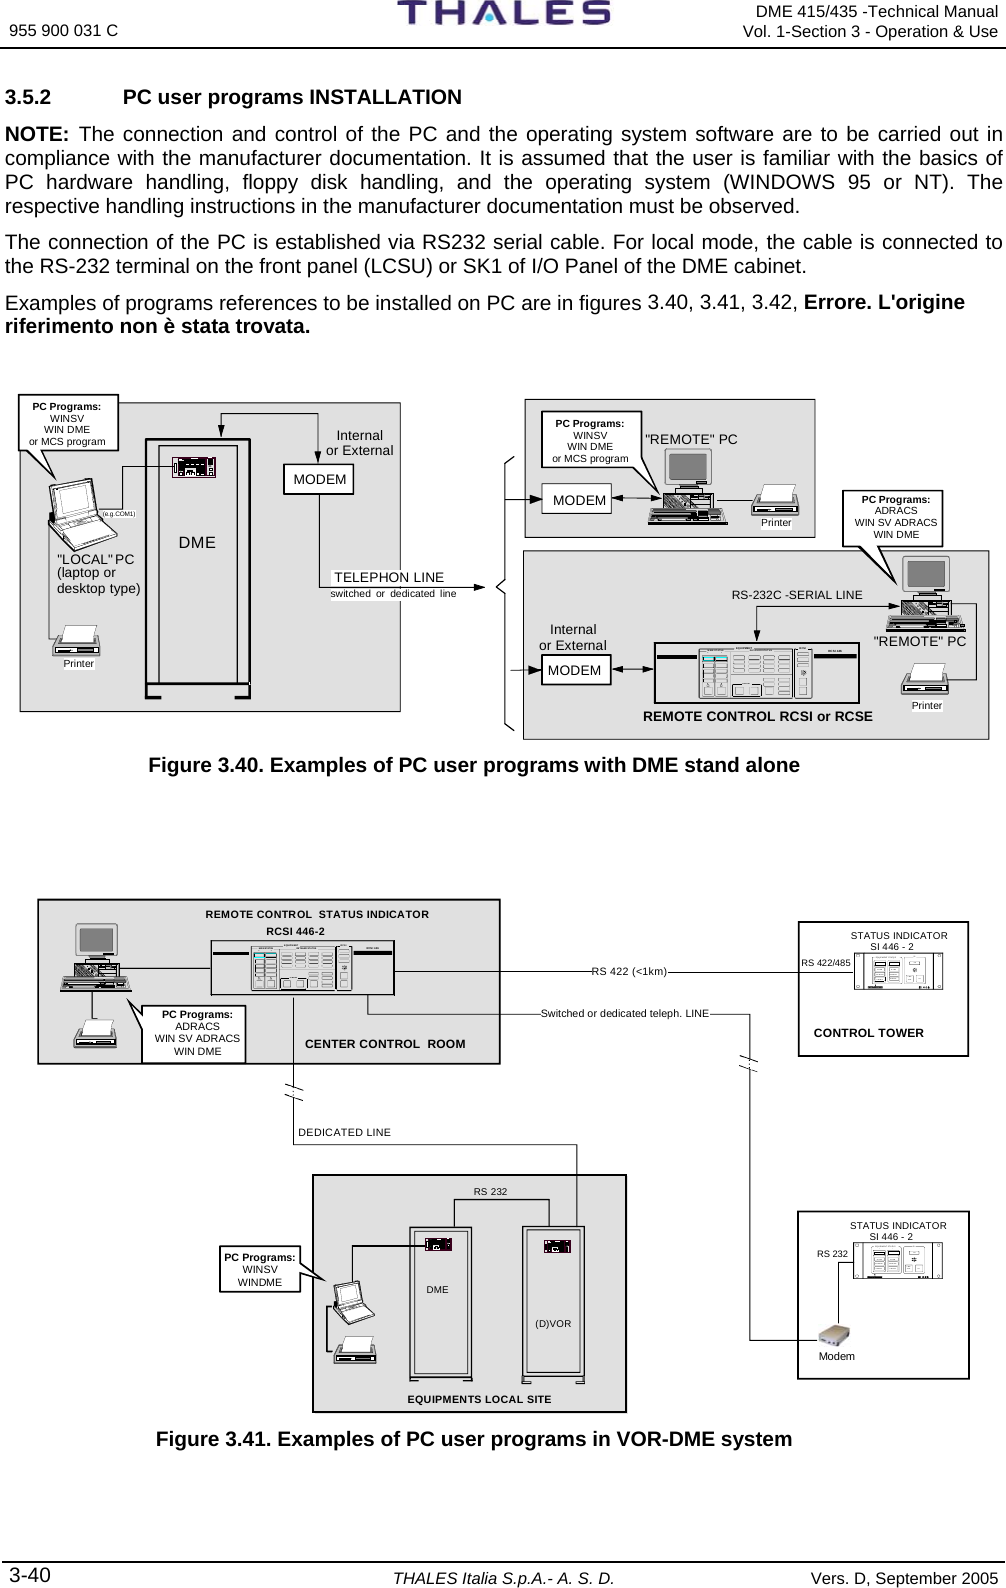 955 900 031 C   DME 415/435 -Technical Manual Vol. 1-Section 3 - Operation &amp; Use 3-40 THALES Italia S.p.A.- A. S. D. Vers. D, September 2005 3.5.2  PC user programs INSTALLATION NOTE: The connection and control of the PC and the operating system software are to be carried out in compliance with the manufacturer documentation. It is assumed that the user is familiar with the basics of PC hardware handling, floppy disk handling, and the operating system (WINDOWS 95 or NT). The respective handling instructions in the manufacturer documentation must be observed. The connection of the PC is established via RS232 serial cable. For local mode, the cable is connected to the RS-232 terminal on the front panel (LCSU) or SK1 of I/O Panel of the DME cabinet.  Examples of programs references to be installed on PC are in figures 3.40, 3.41, 3.42, Errore. L&apos;origine riferimento non è stata trovata.  &quot;REMOTE&quot; PC  TELEPHON LINEREMOTE CONTROL RCSI or RCSEInternal or External MODEMMODEM&quot;REMOTE&quot; PC PC &quot;LOCAL&quot;(laptop or desktop type)DME RCS I 446EQUIPMEN T RCSI12DETAILED STATUSMAIN STATUSCOMMANDMODEM RS-232C -SERIAL LINEswitched or dedicated linePrinterInternal or External PrinterPrinter(e.g.COM1)PC Programs:WINSVWIN DMEor MCS programPC Programs:WINSVWIN DMEor MCS programPC Programs:ADRACSWIN SV ADRACSWIN DME Figure 3.40. Examples of PC user programs with DME stand alone    REMOTE CONTROL  STATUS INDICATORRCSI 446-2 STATUS INDICATOR SI 446 - 2RCSI 446WARNINGNORMALALA RM1ONSILLAMPTESTEQUIPMENT STATU S SIWARNINGNORMALALARM2RS 232DME (D)VOREQUIPMENTS LOCAL SITECENTER CONTROL  ROOMDEDICATED LINECONTROL TOWEREQUIPMENT RCSI12 DETAILED STAT USMAIN STAT USCOMM ANDSTATUS INDICATOR SI 446 - 2WARN INGNORMALALA RM1ONSILLAMPTESTEQUIPMENT STATU S SIWARNINGNORMALALA RM2Switched or dedicated teleph. LINEModem RS 232RS 422/485RS 422 (&lt;1km)PC Programs:ADRACSWIN SV ADRACSWIN DMEPC Programs:WINSVWINDME Figure 3.41. Examples of PC user programs in VOR-DME system 